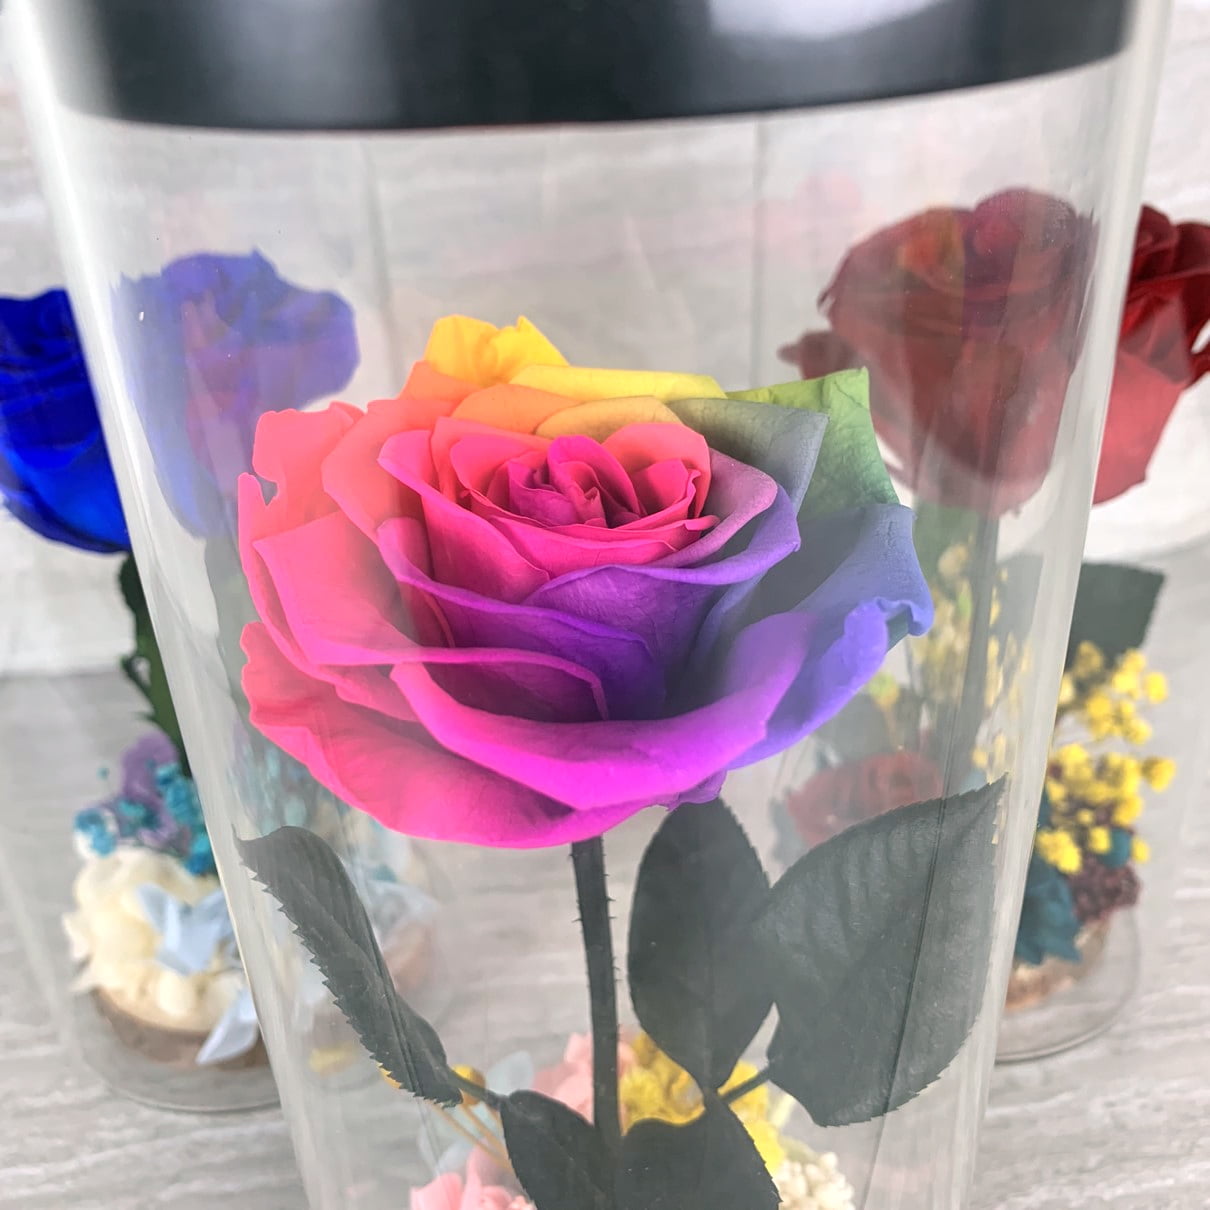 Eternal Rose with Preserved Moss Forever Rose Infinity Rose in a Glass Vase